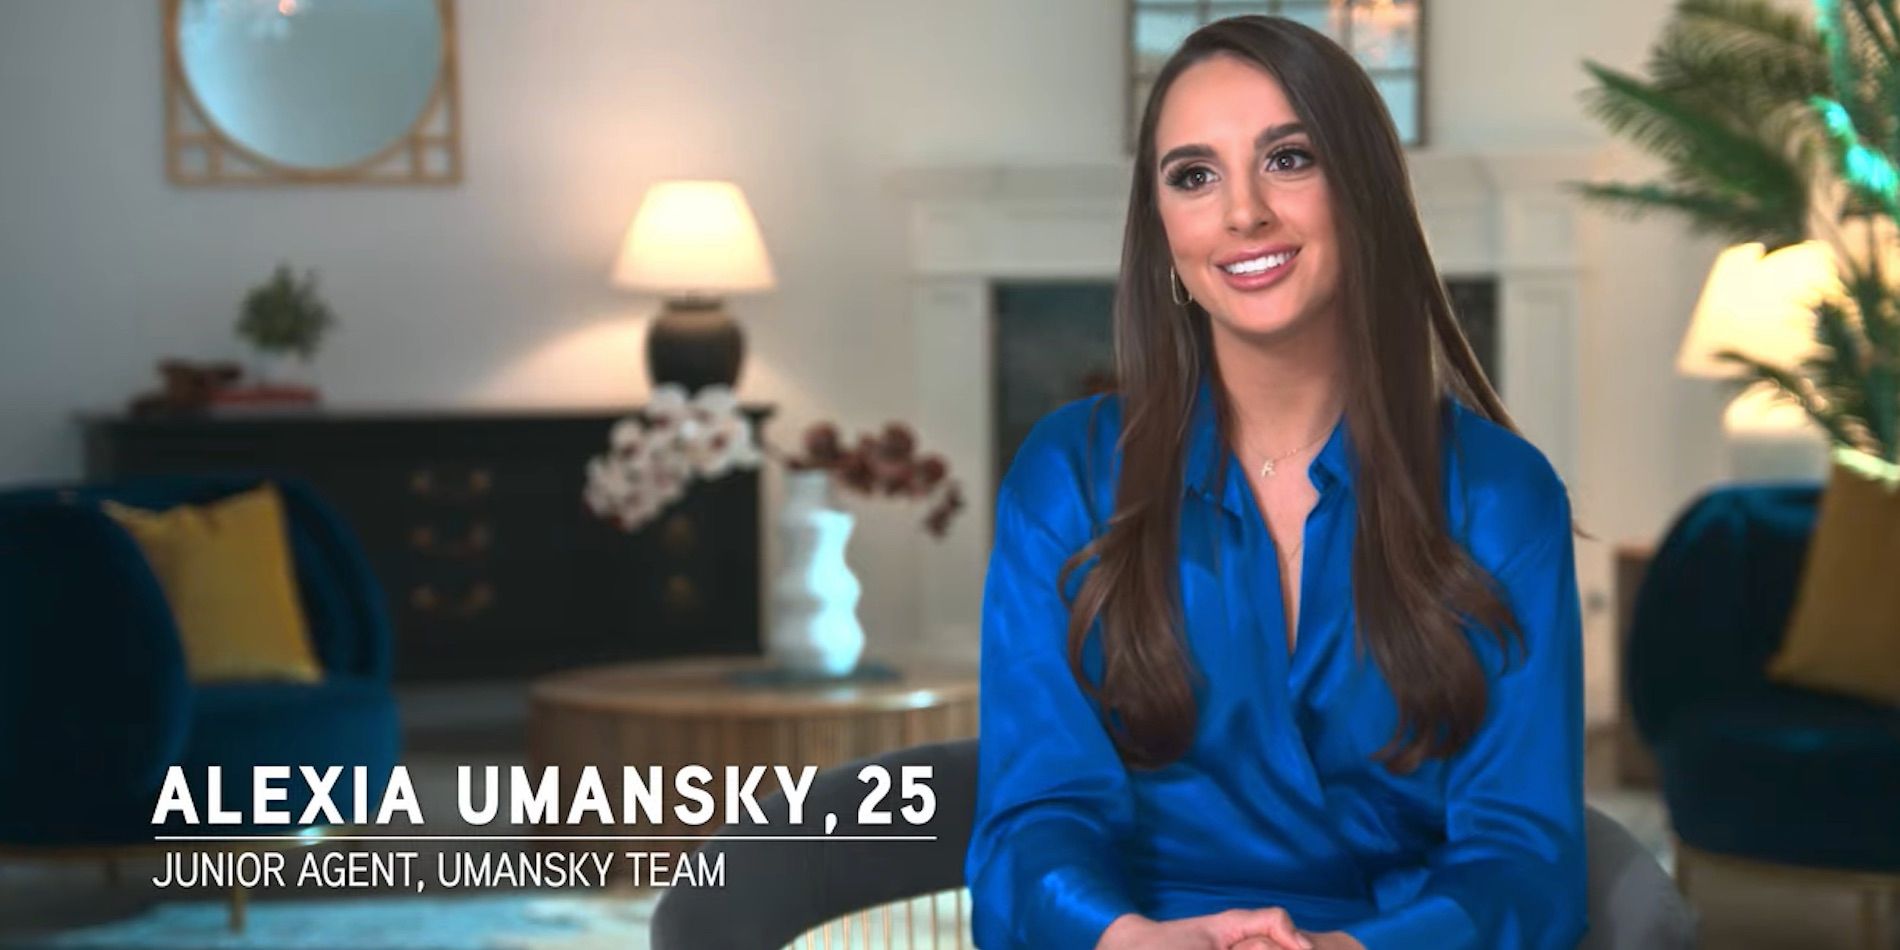 Alexia Umansky in an interview with a chyron on the screen with her name, age, and title